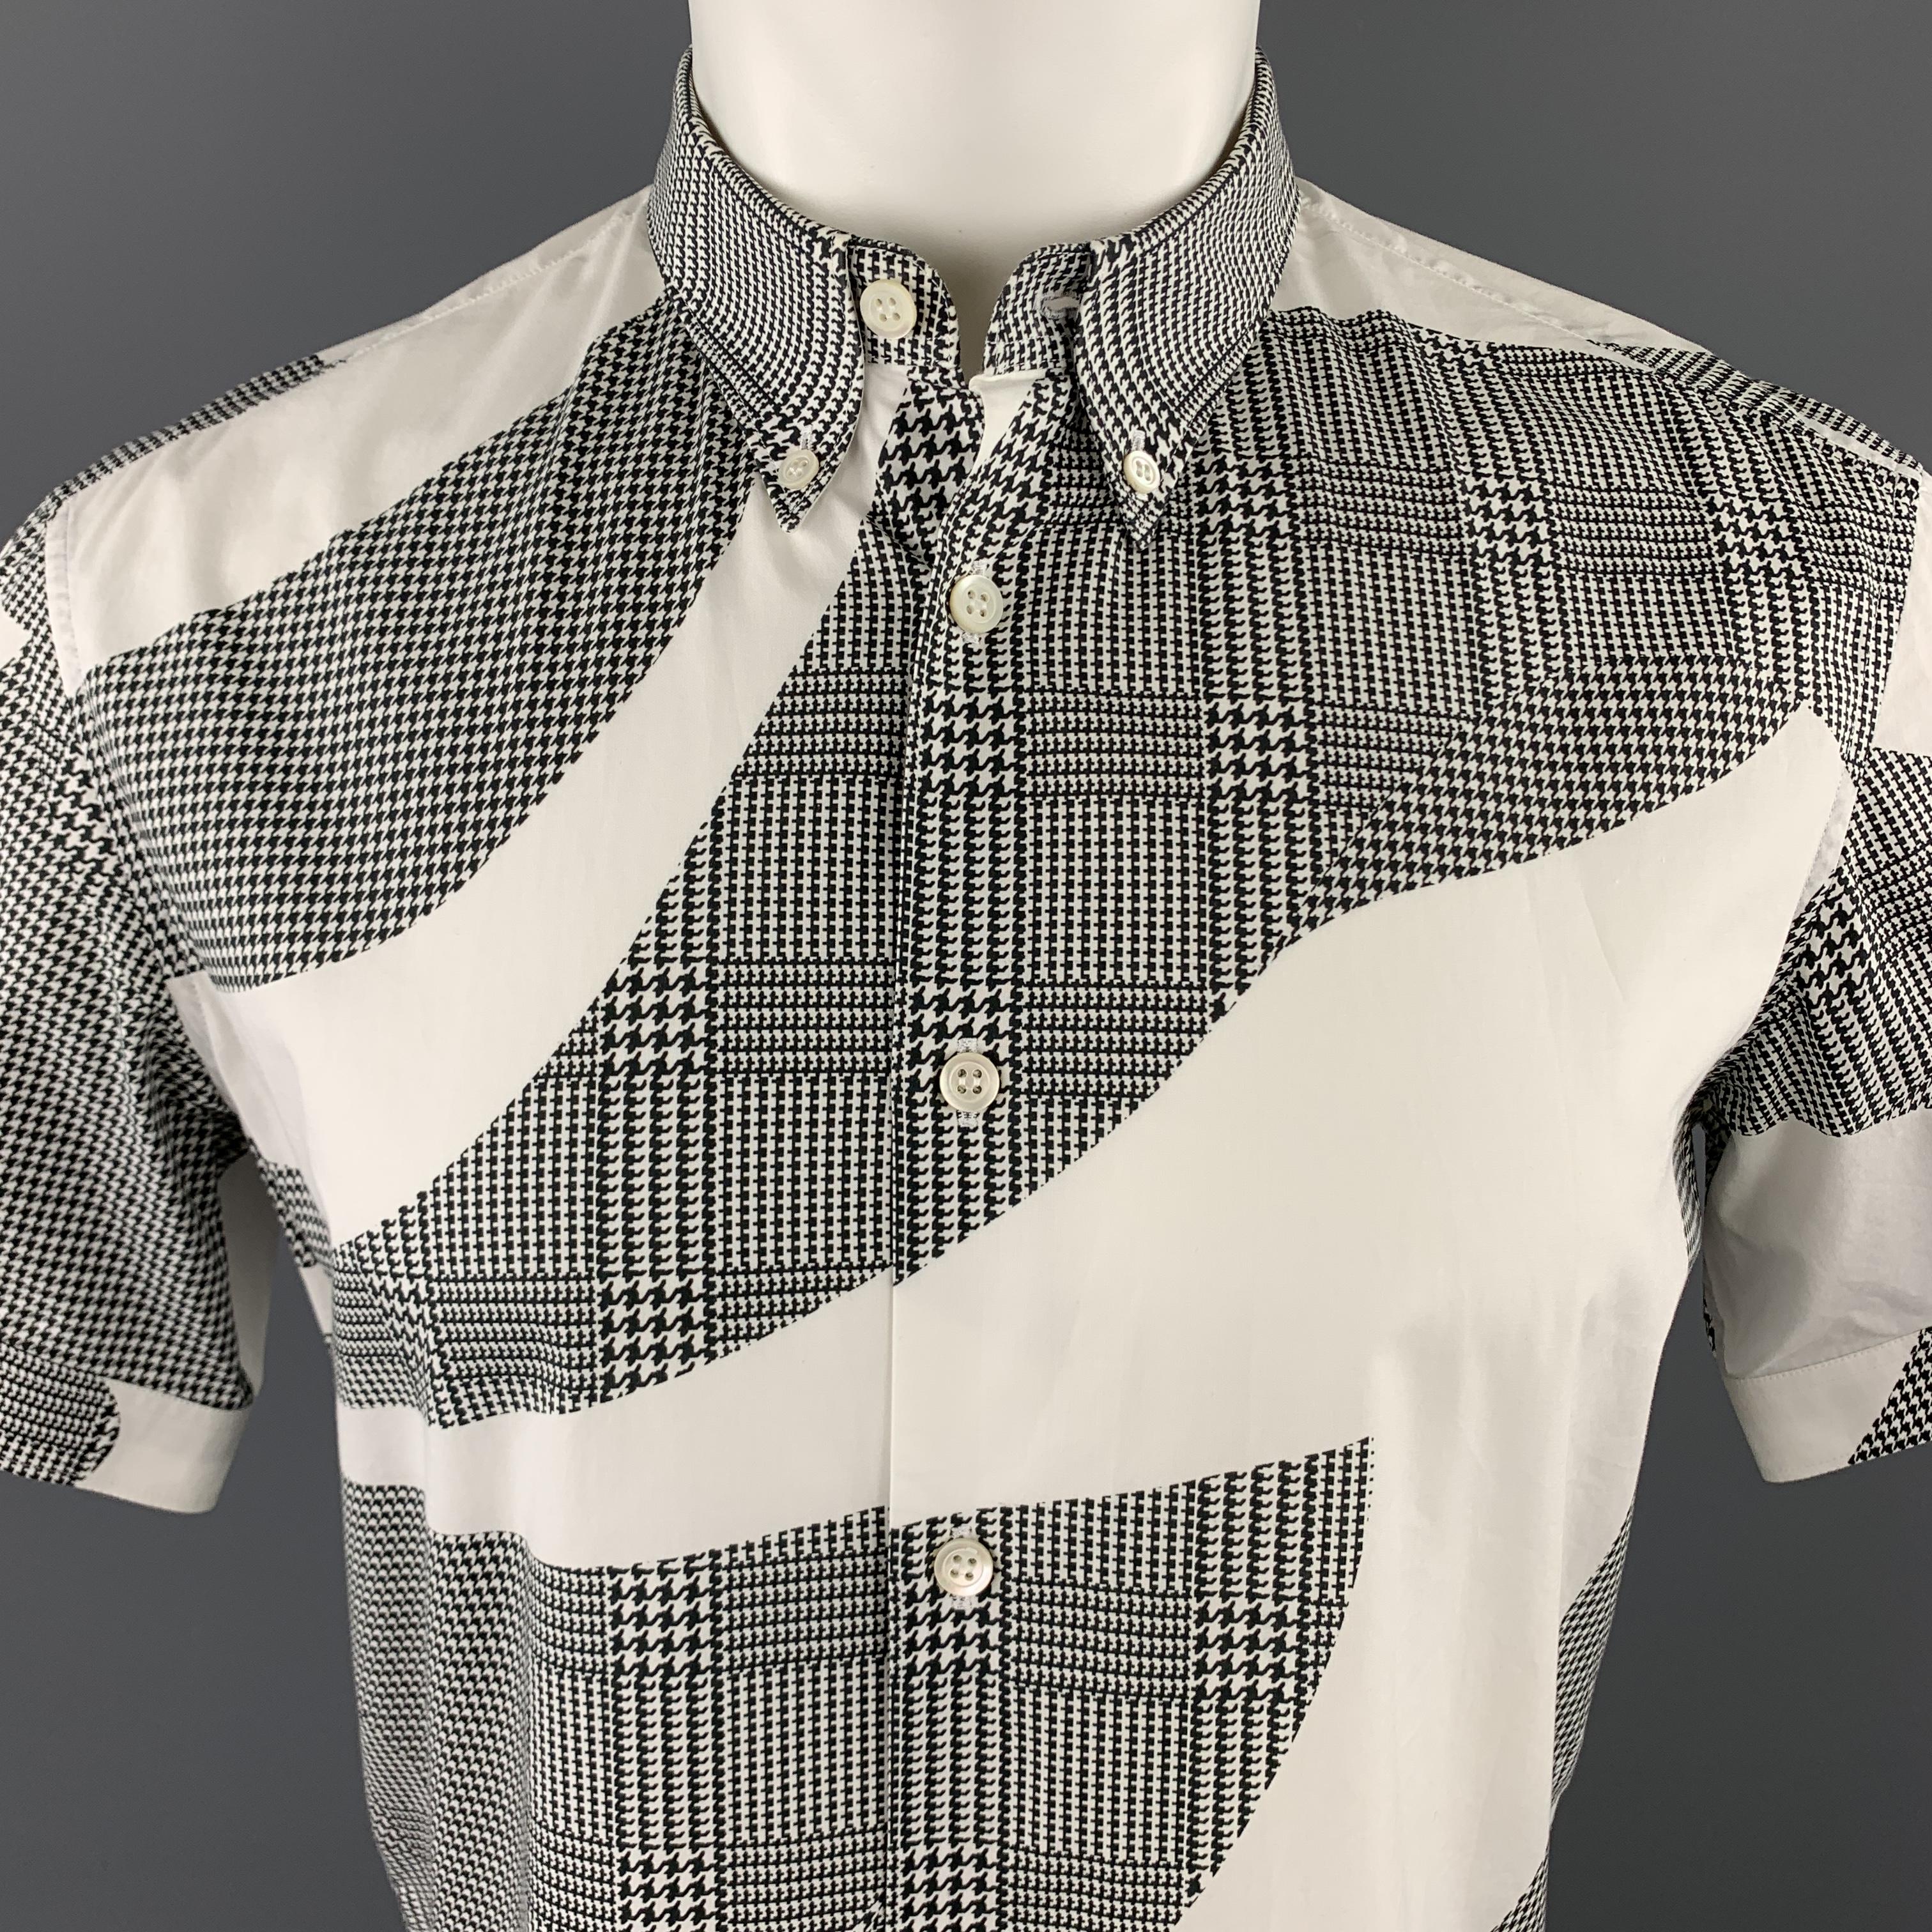 ALEXANDER MCQUEEN short sleeve shirt comes in white cotton with an all over graphic black houndstooth print and button down collar. 

Excellent Pre-Owned Condition.
Marked: IT 48

Measurements:

Shoulder: 17 in.
Chest: 42 in.
Sleeve: 8.5 in.
Length: